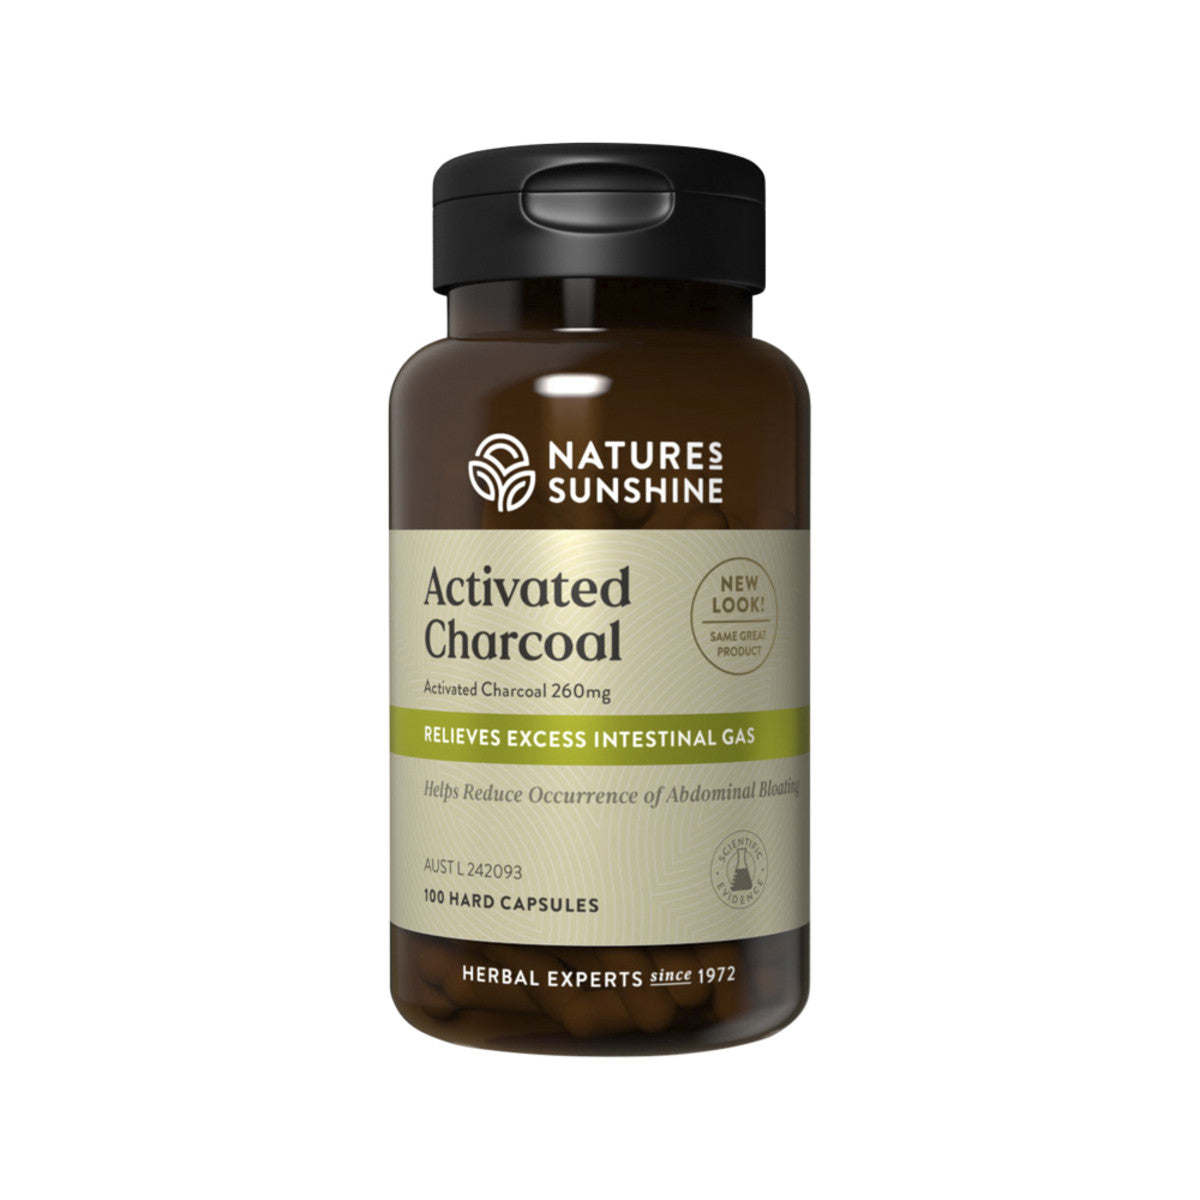 Nature's Sunshine Activated Charcoal 260mg, 100 Hard Capsules